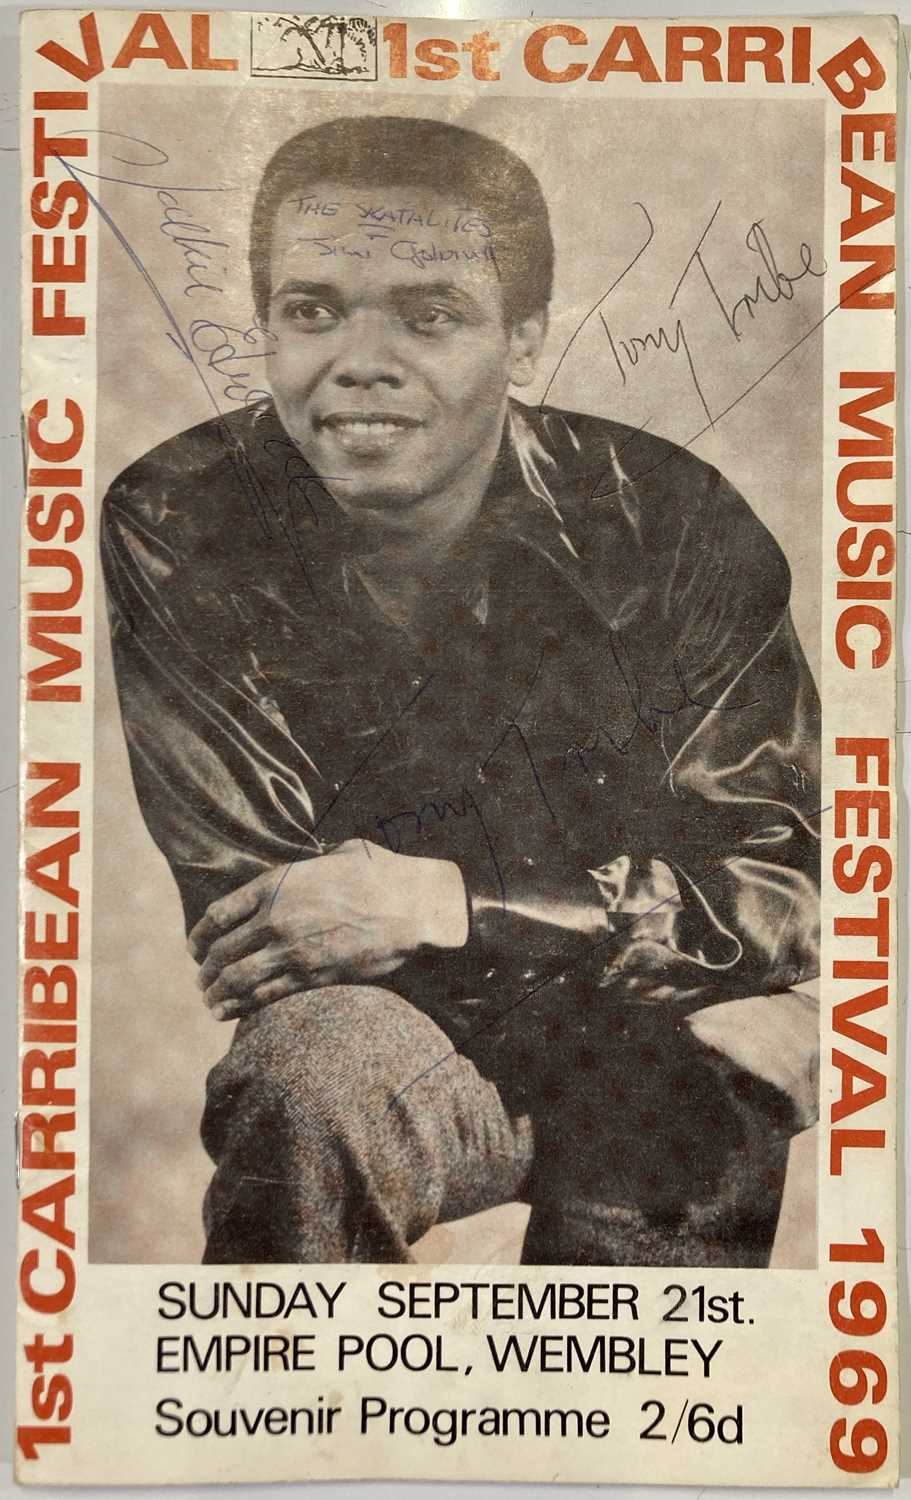 1969 1ST CARIBBEAN MUSIC FESTIVAL PROGRAMME - SIGNED BY JACKIE EDWARDS / MAX ROMEO AND MORE.